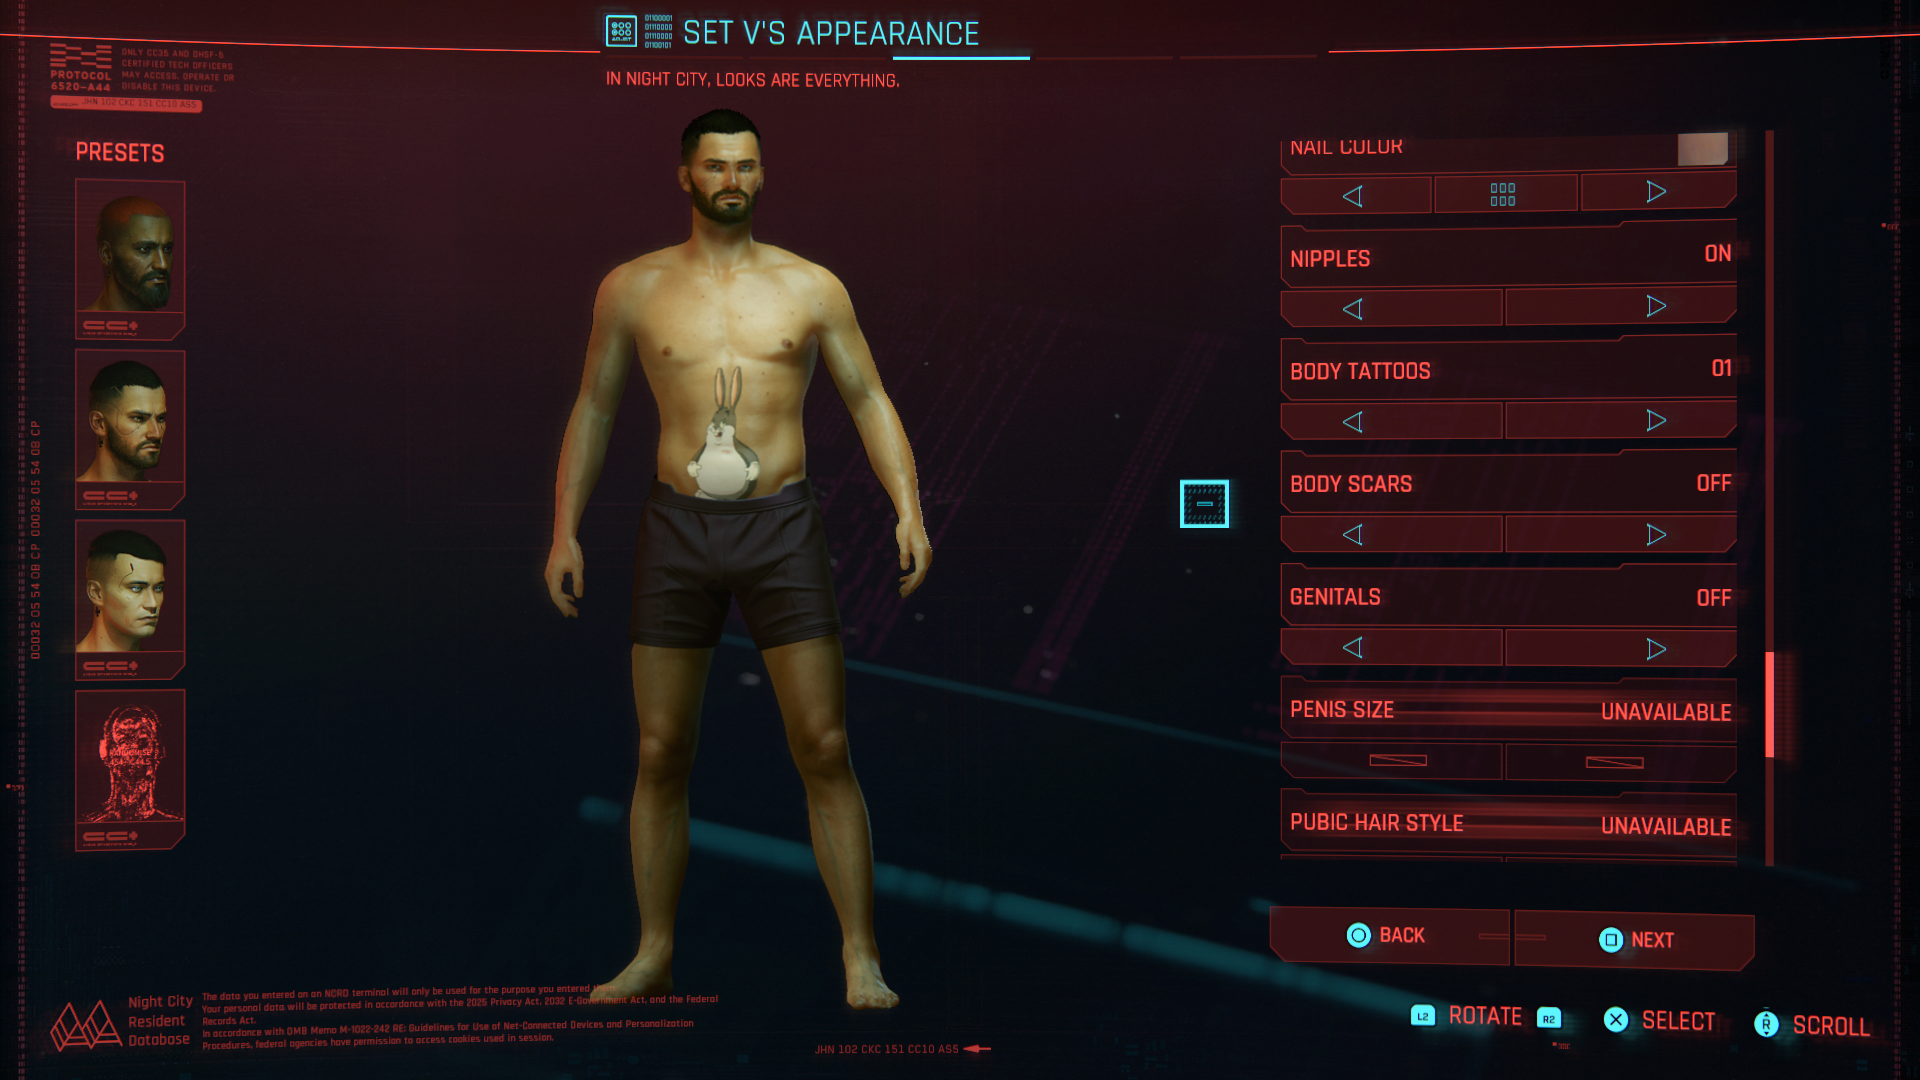 gaming-memes cyberpunk character creator - Be Set V'S Appearance Inhos City. Lord Aleverythm Presets Nail Lulu On Nipples Body Tattoos 07 D BO0Y Scars Off